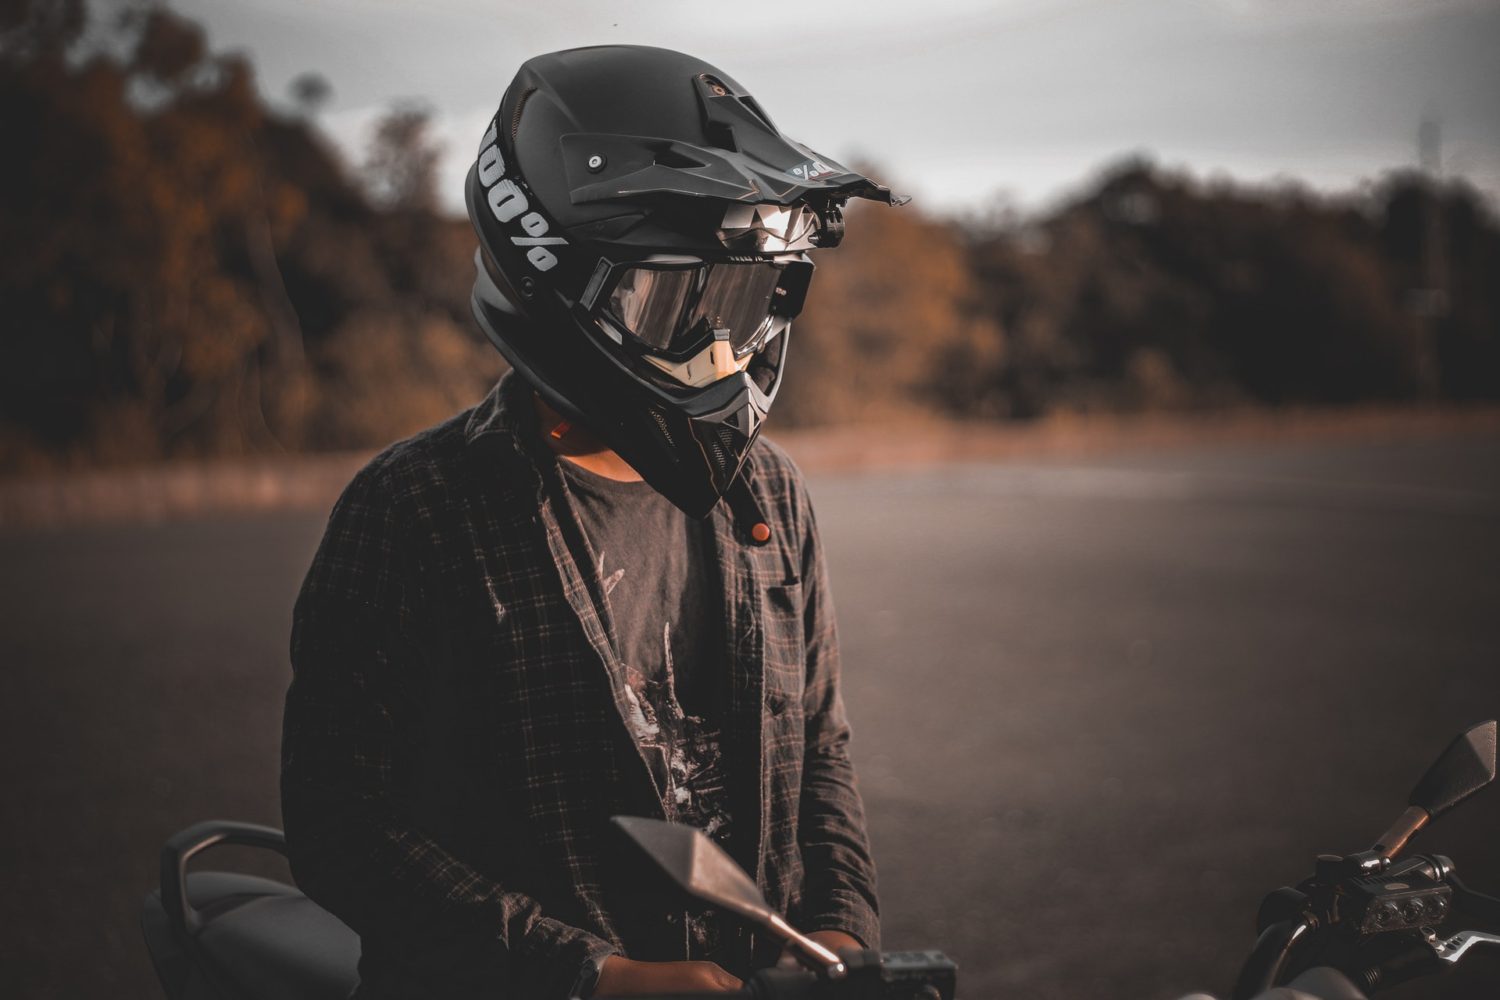 How to Soundproof a Motorcycle Helmet - Complete Guide - Audio MAV